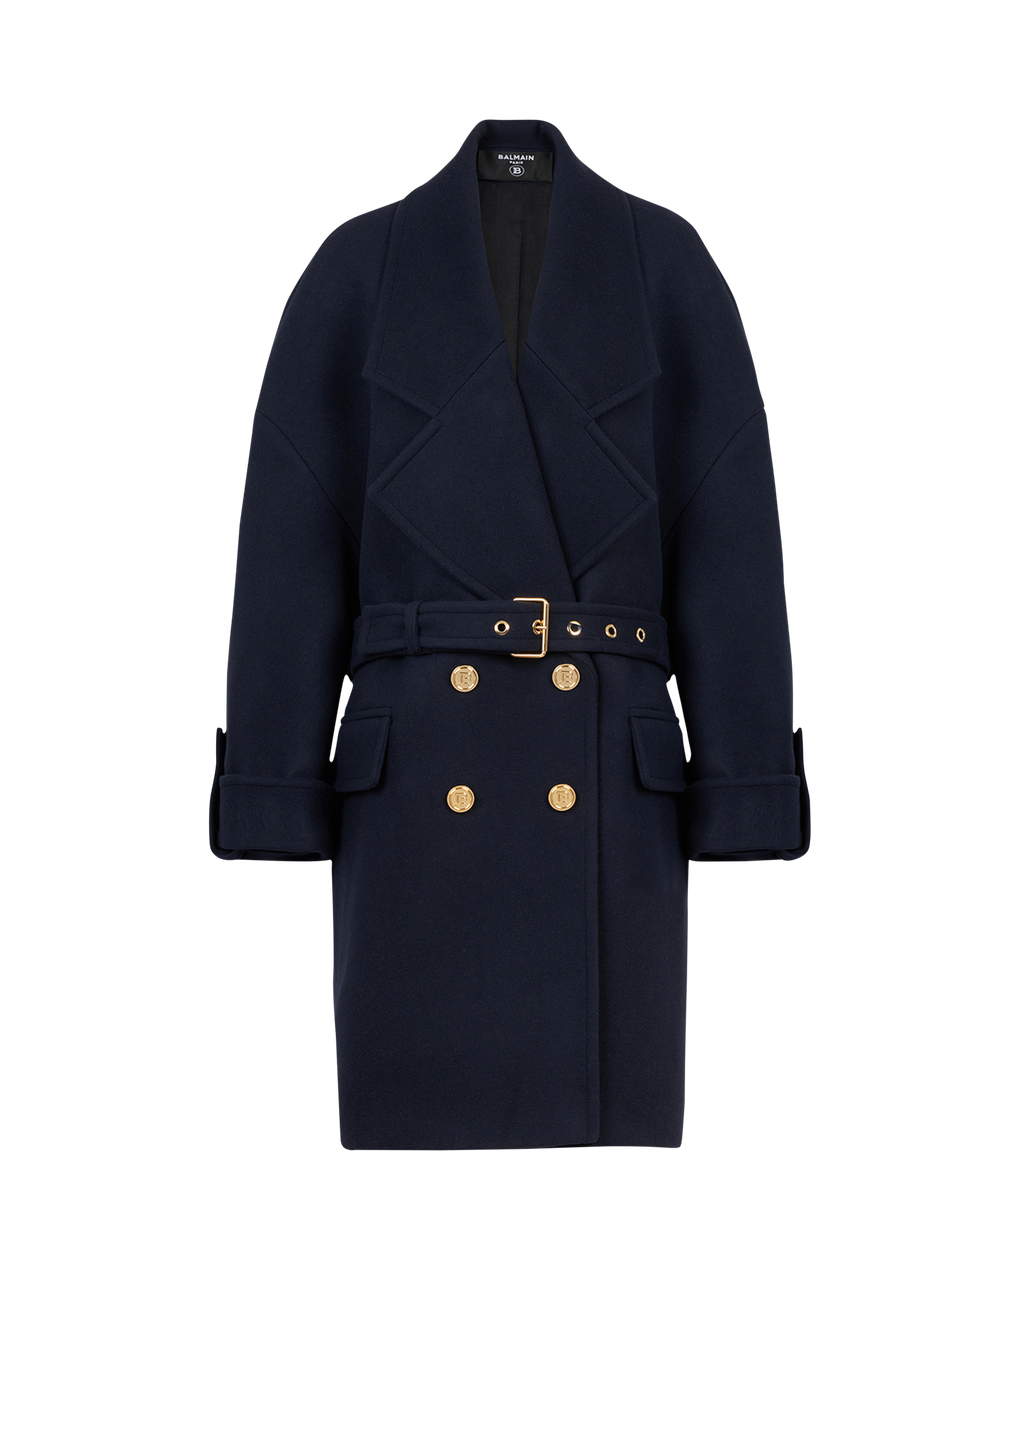 Wool and cashmere pea coat with double-breasted gold-tone buttoned fastening, navy, hi-res